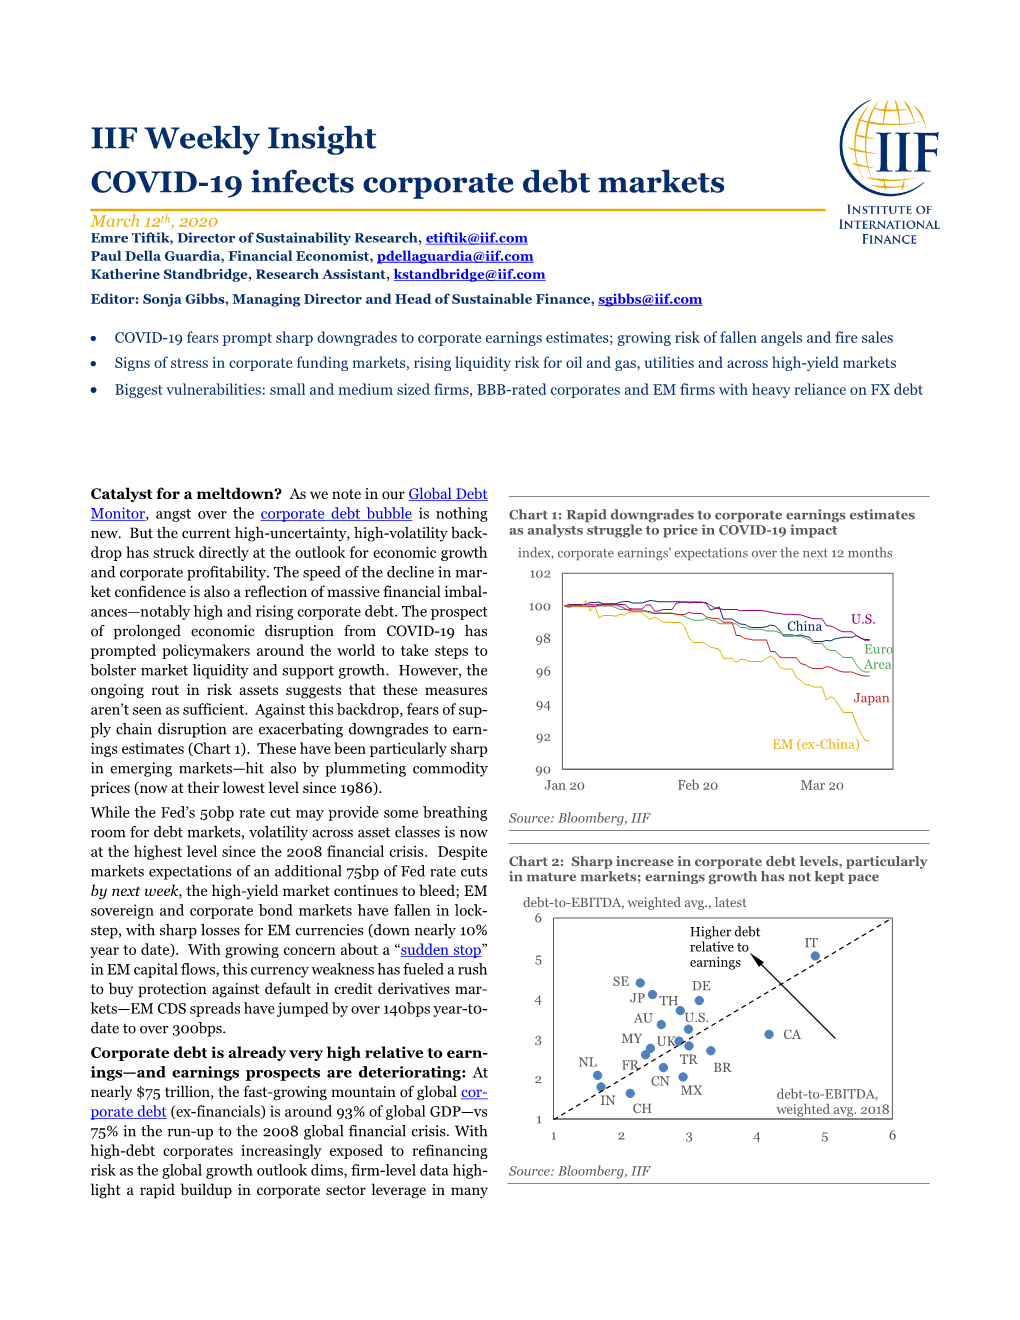 IIF Weekly Insight COVID-19 Infects Corporate Debt Markets